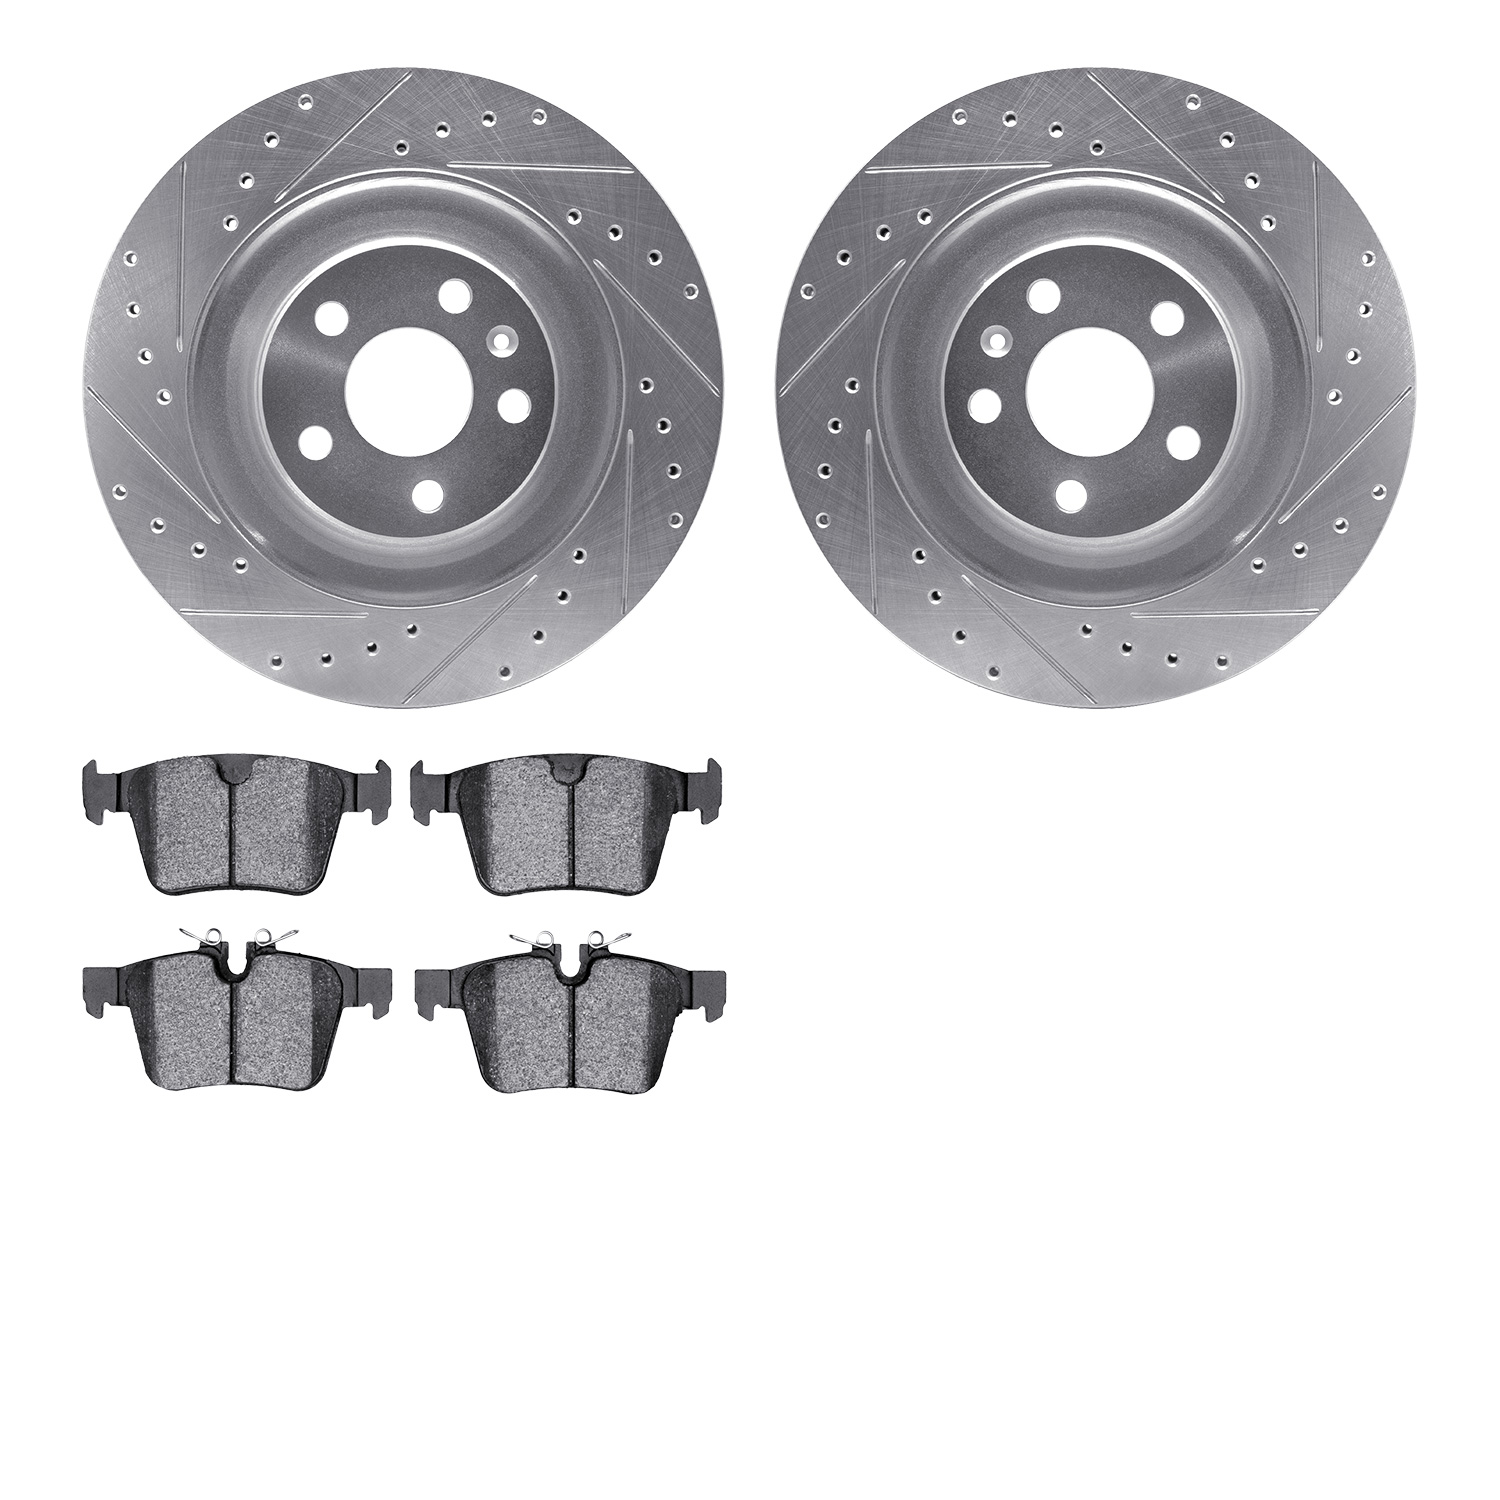 7602-27048 Drilled/Slotted Brake Rotors w/5000 Euro Ceramic Brake Pads Kit [Silver], Fits Select Multiple Makes/Models, Position